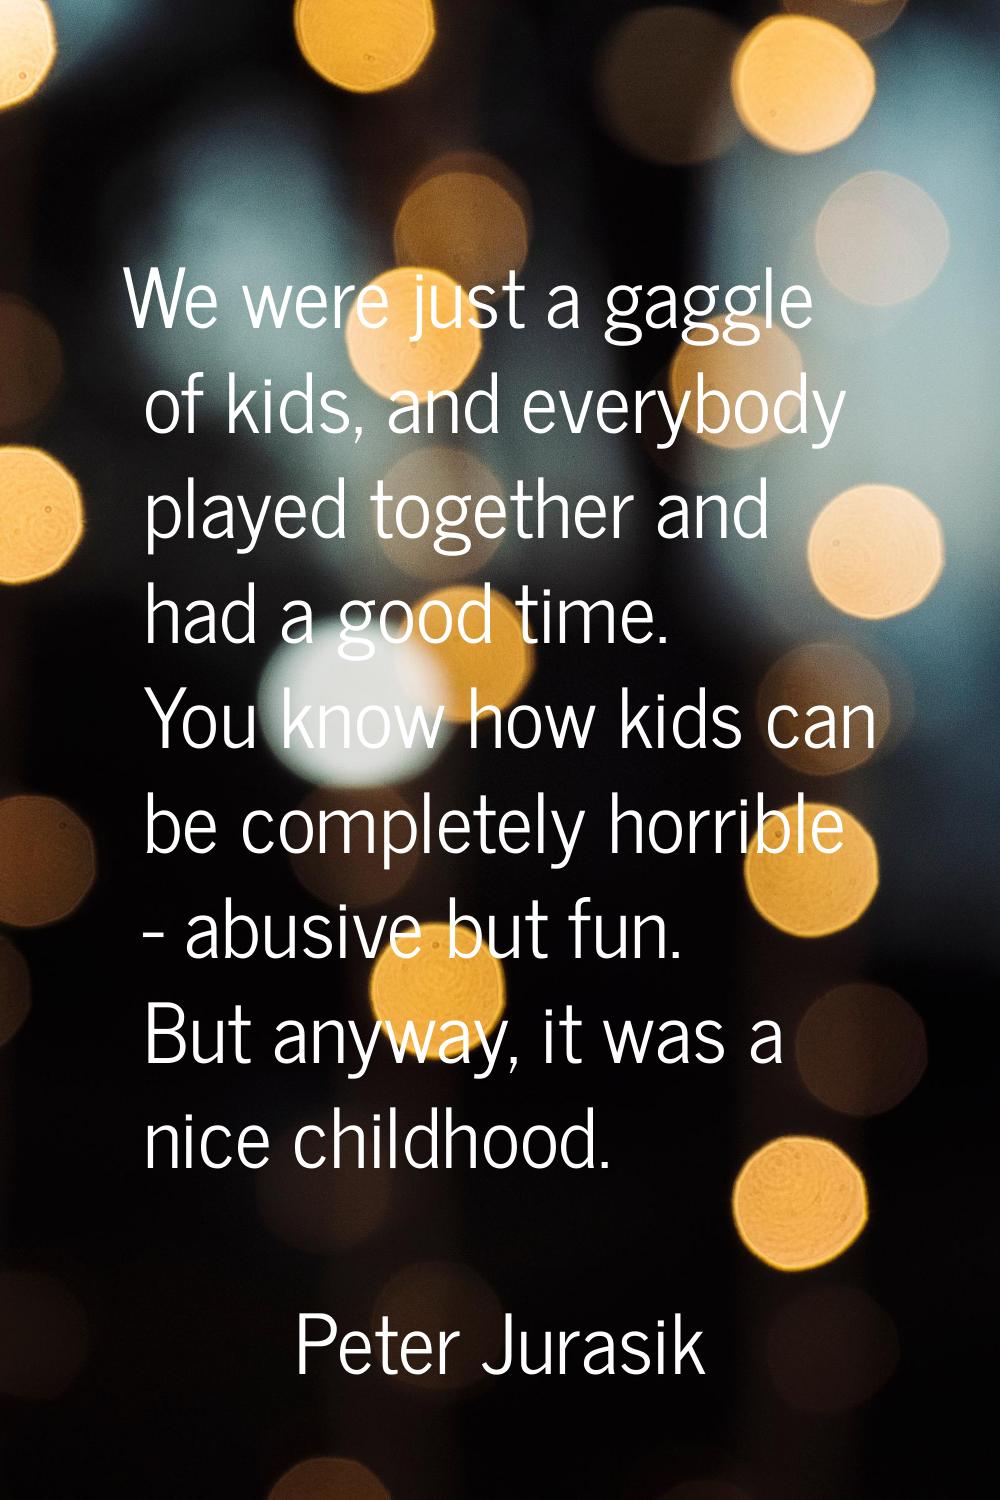 We were just a gaggle of kids, and everybody played together and had a good time. You know how kids